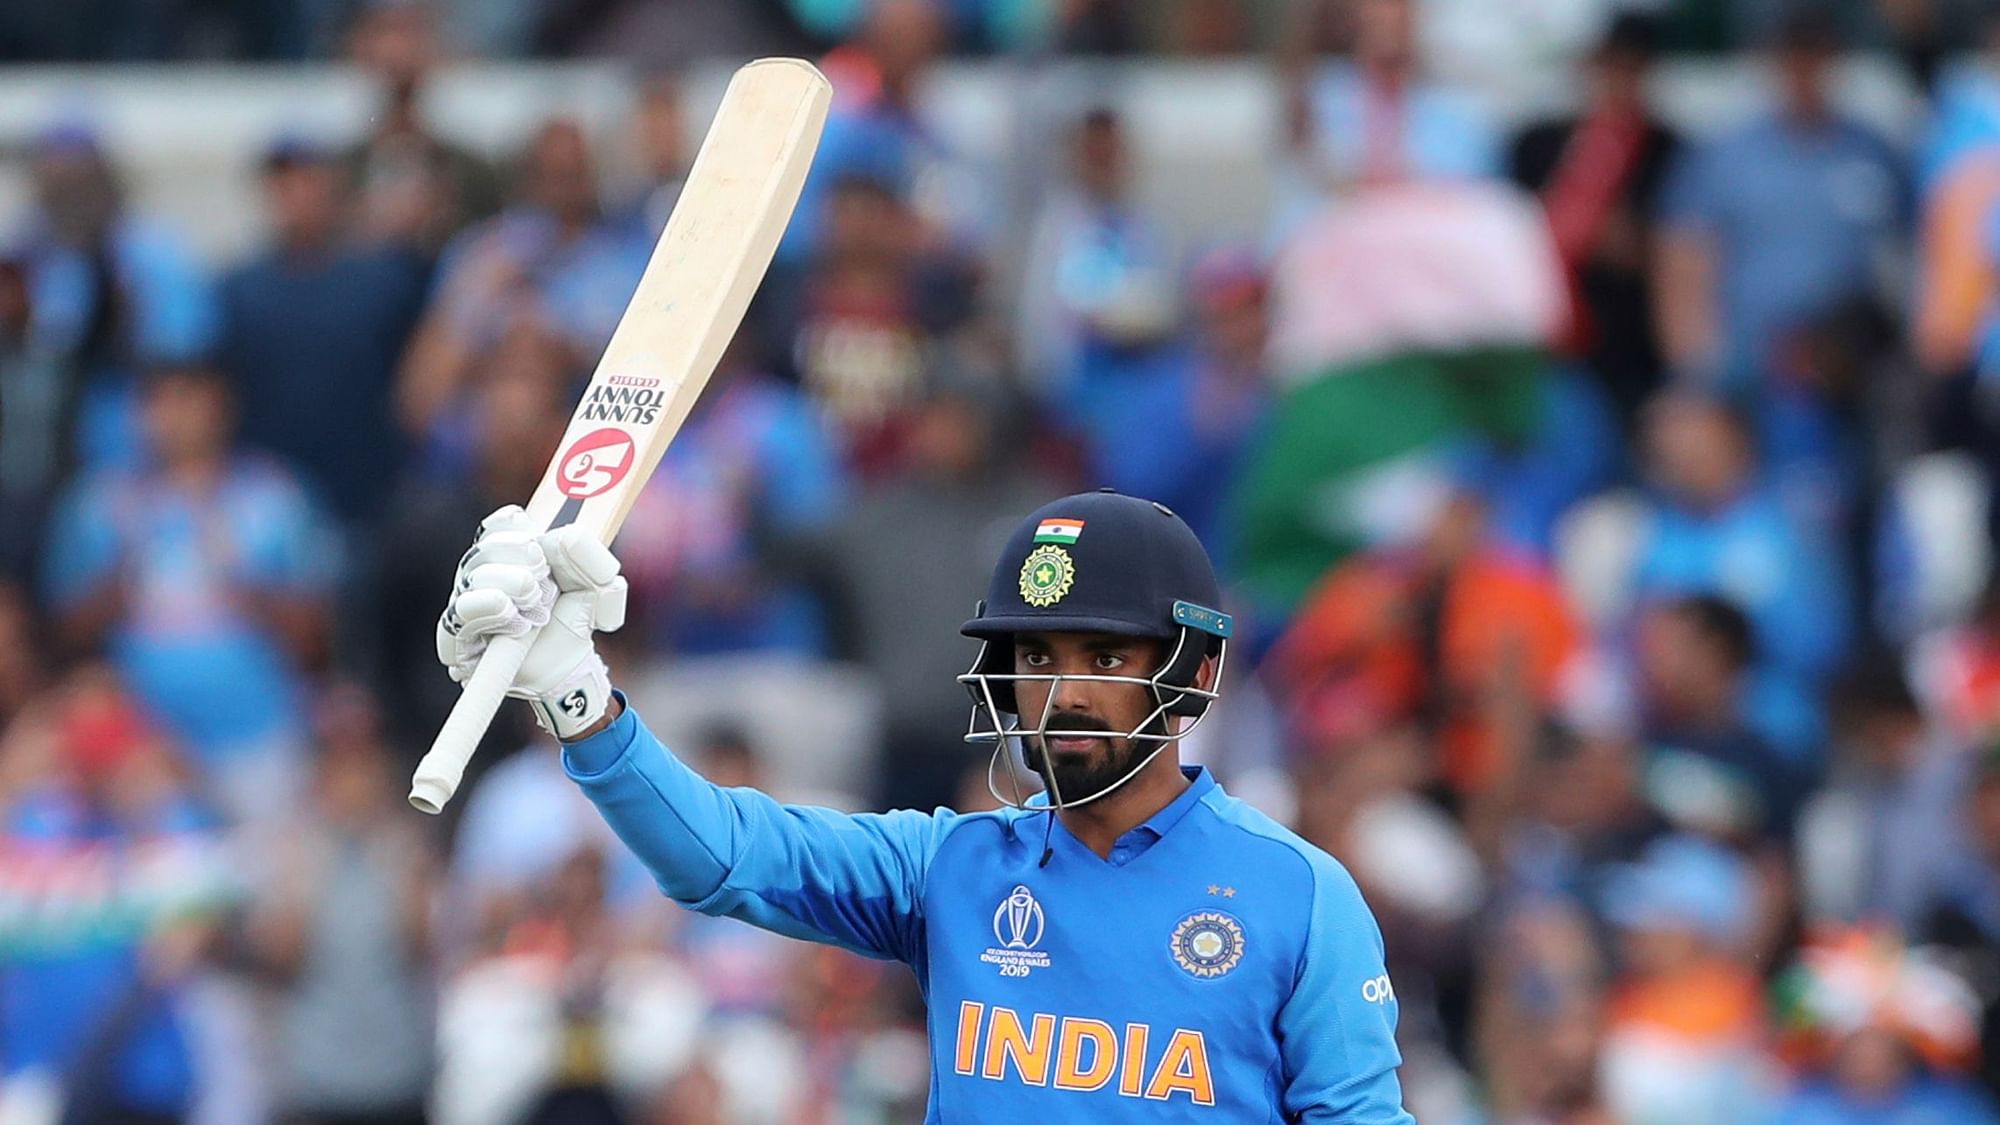 This is Rahul’ first World Cup ton and his second overall.&nbsp;